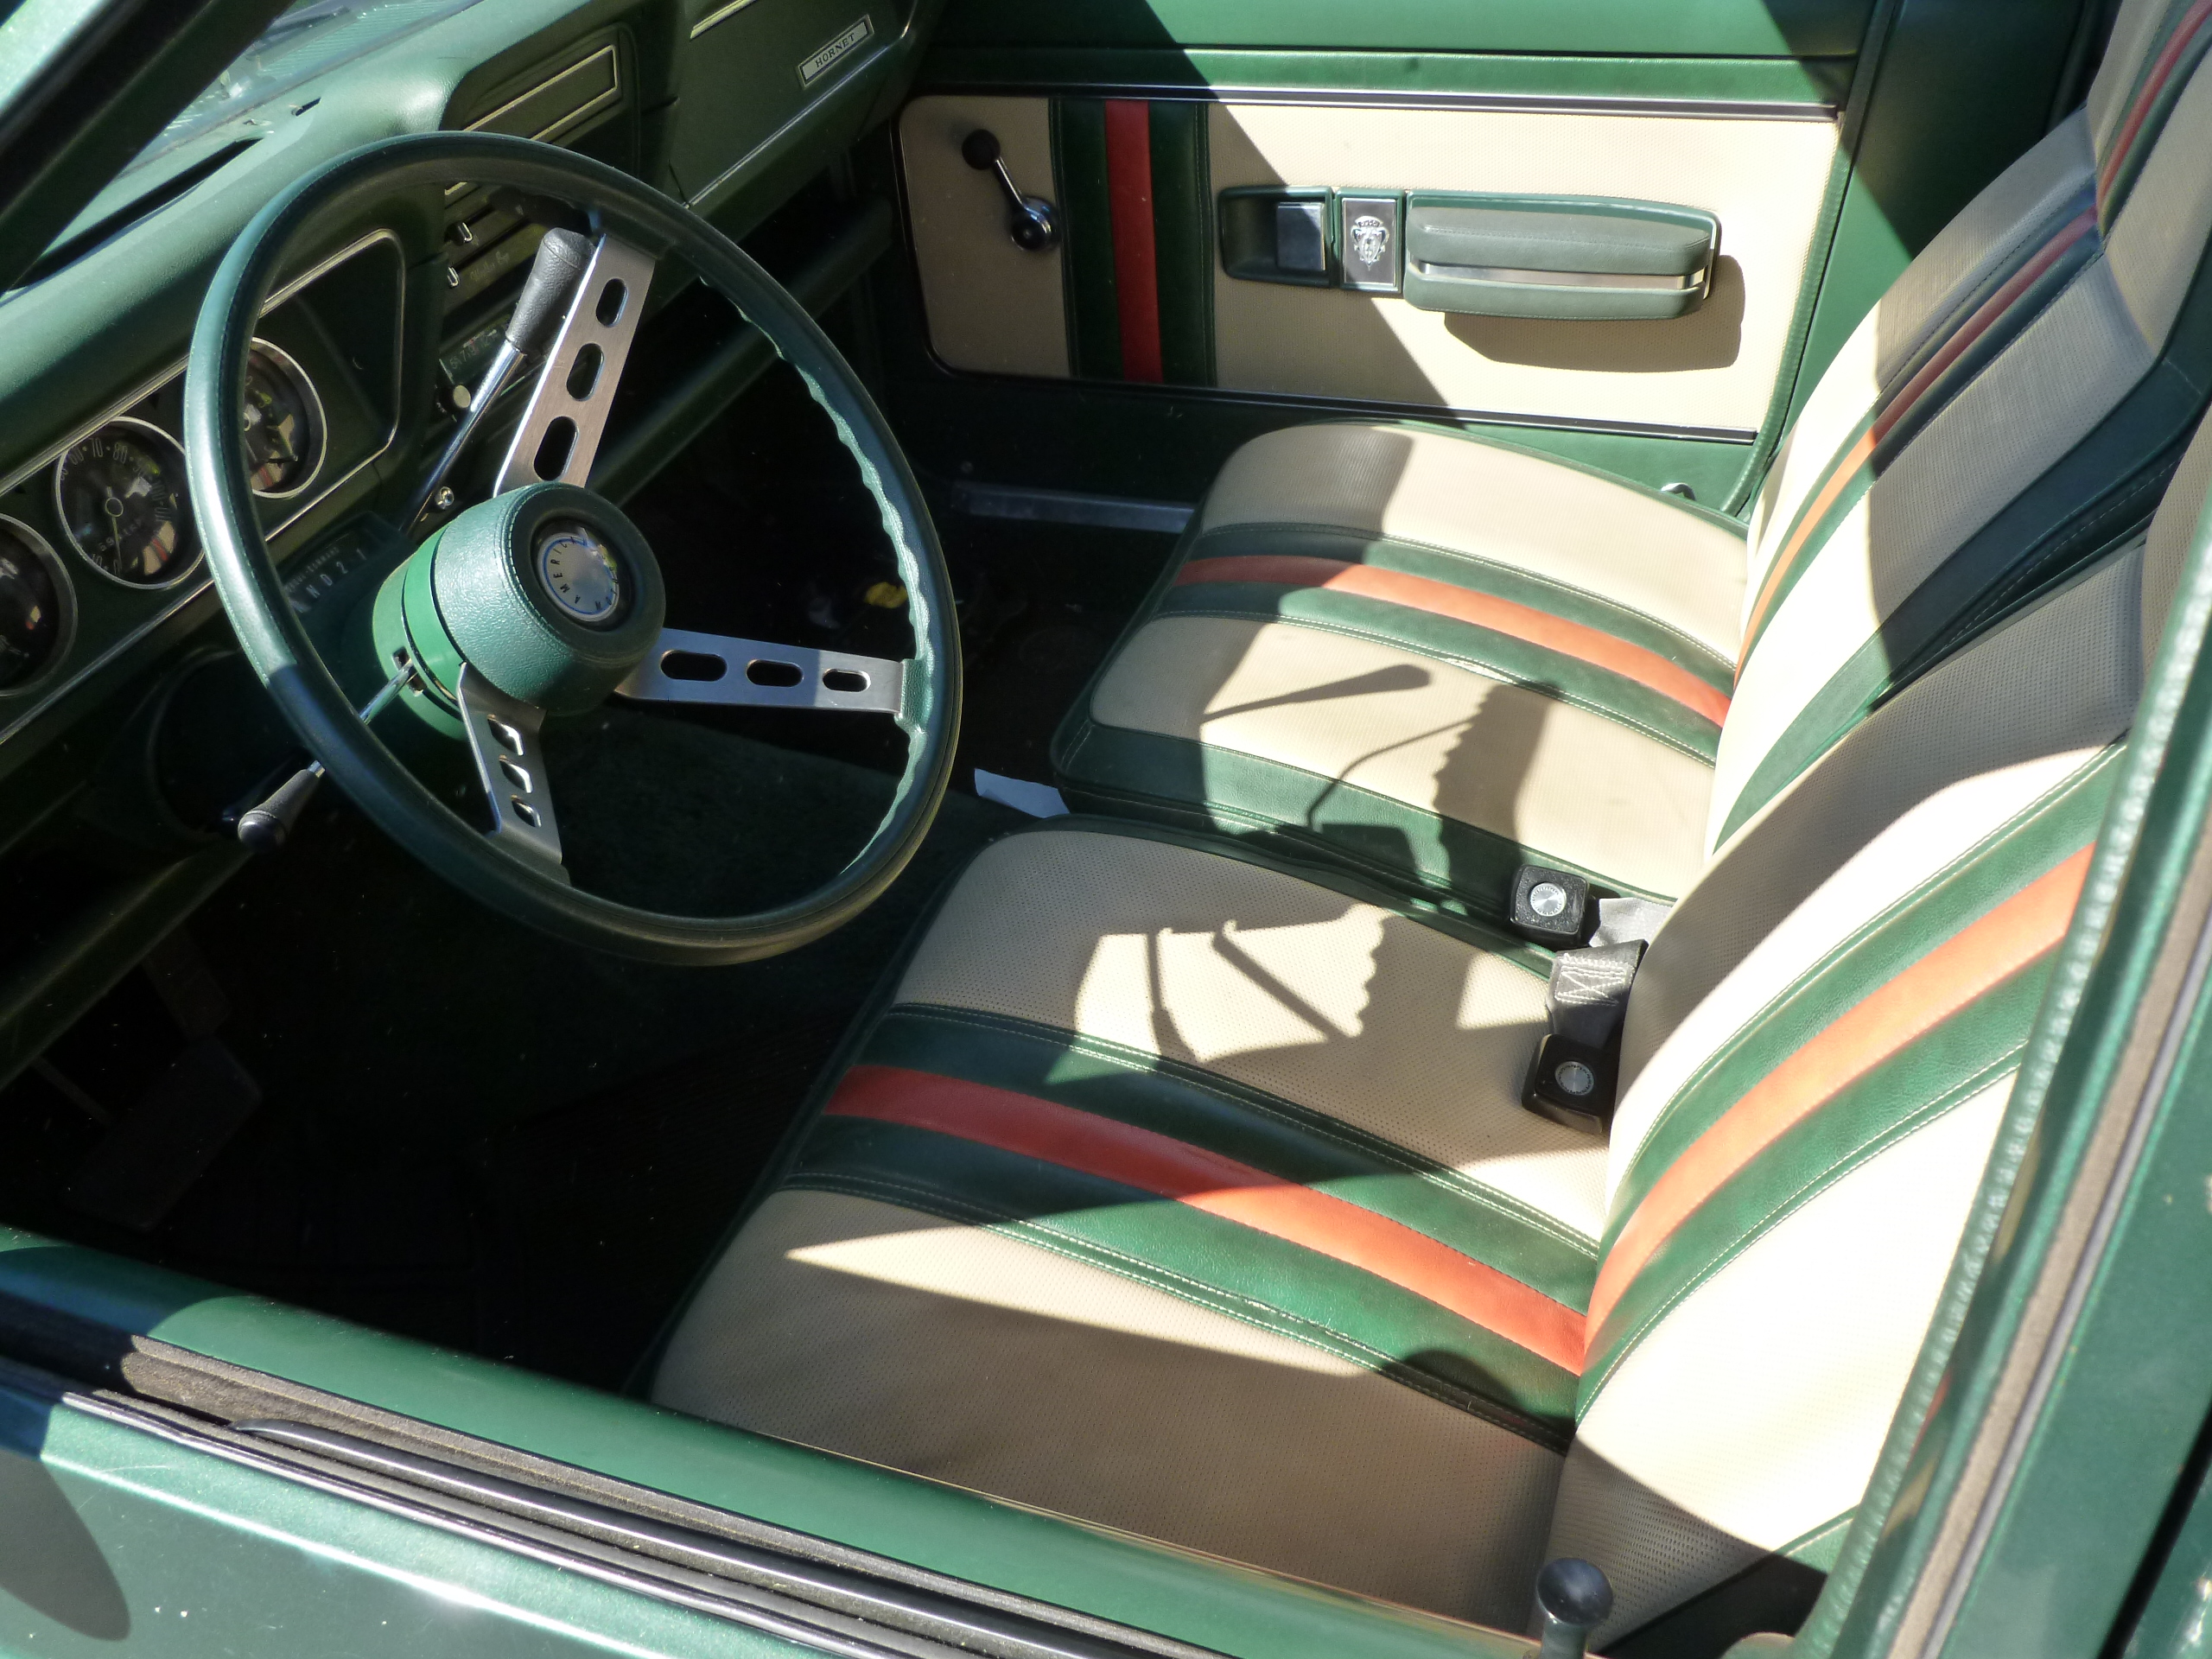 Interior pic, showing the factory sport wheel, and rare optional "tilt...